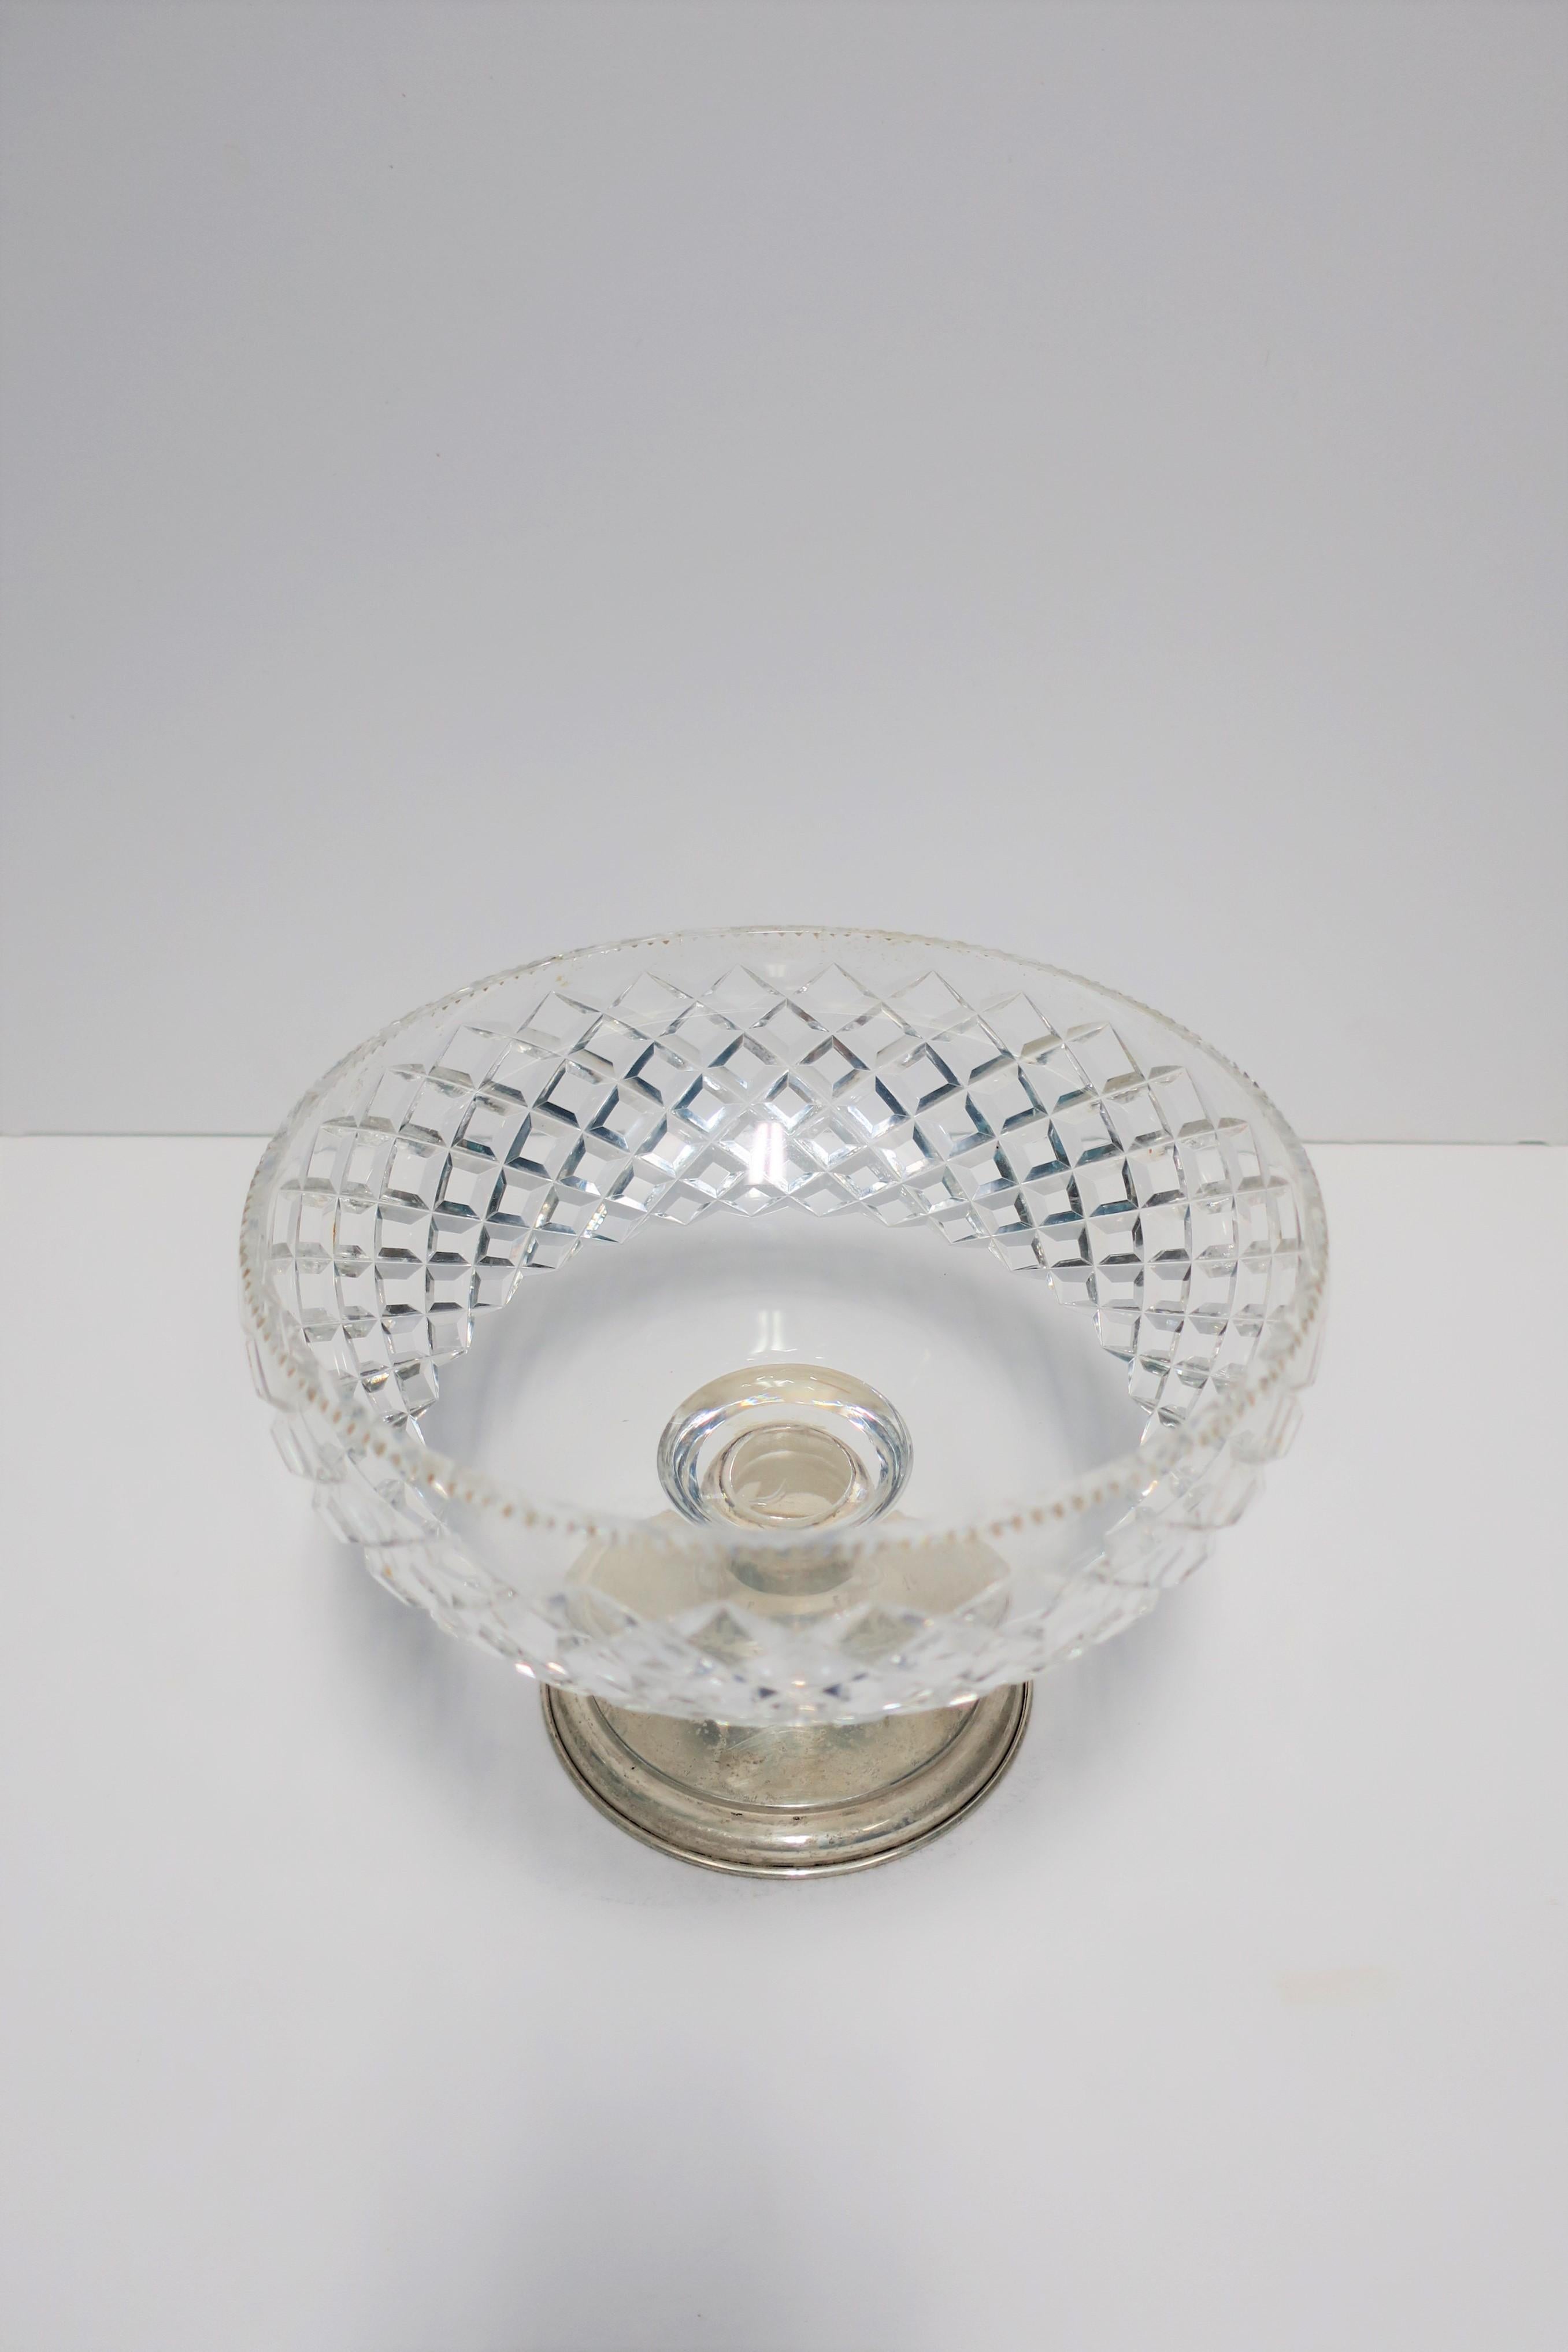 American Sterling Silver and Crystal Compote or Footed Bowl by T. G. Hawkes & Co. For Sale